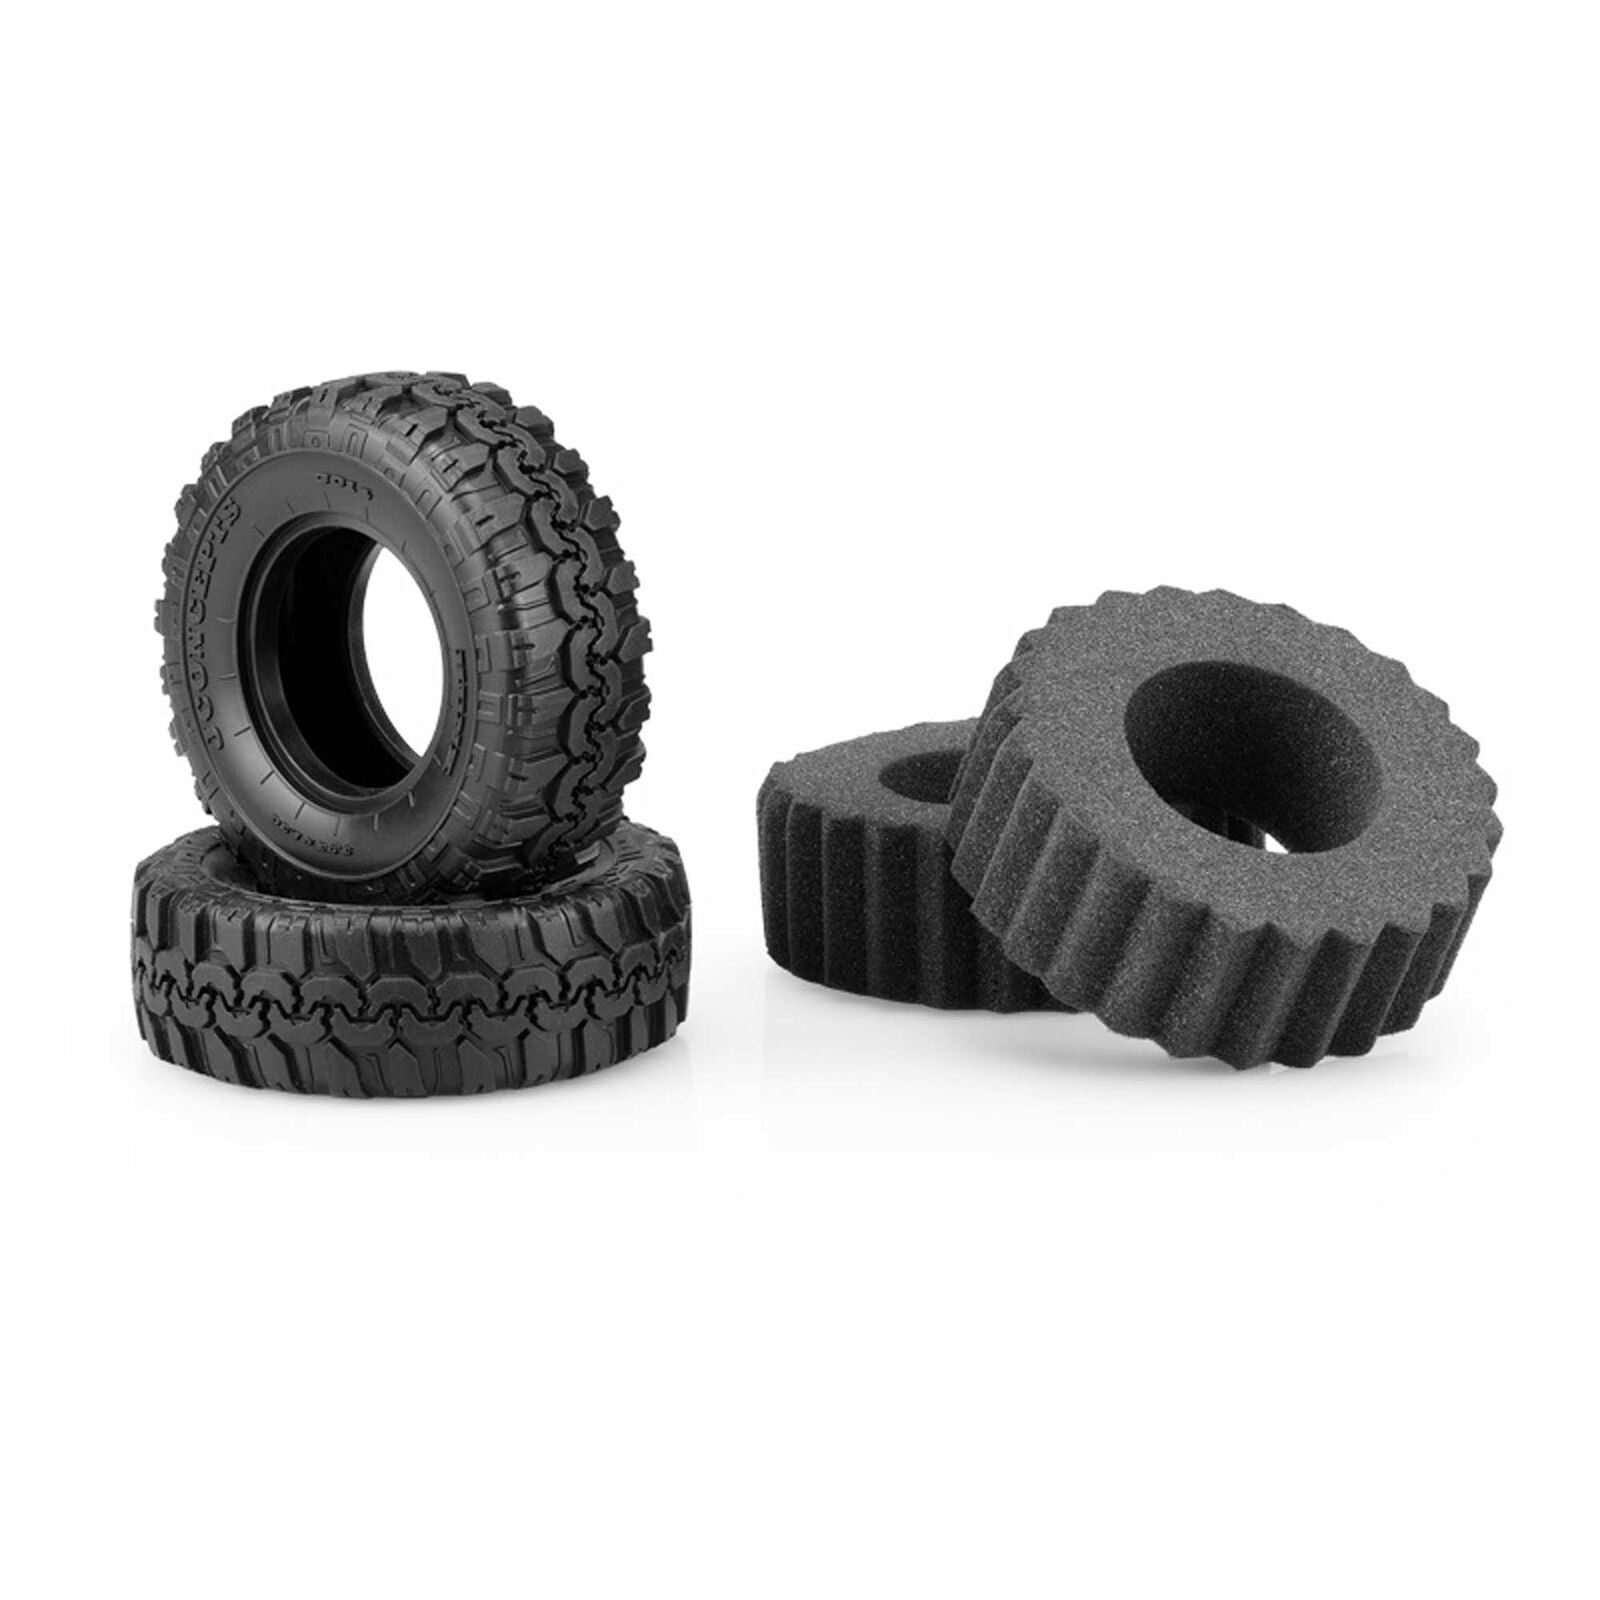 JCONCEPTS 3014-02 Hunk Scale Country 1.9"/3.93" OD Tires, Green Compound (2)